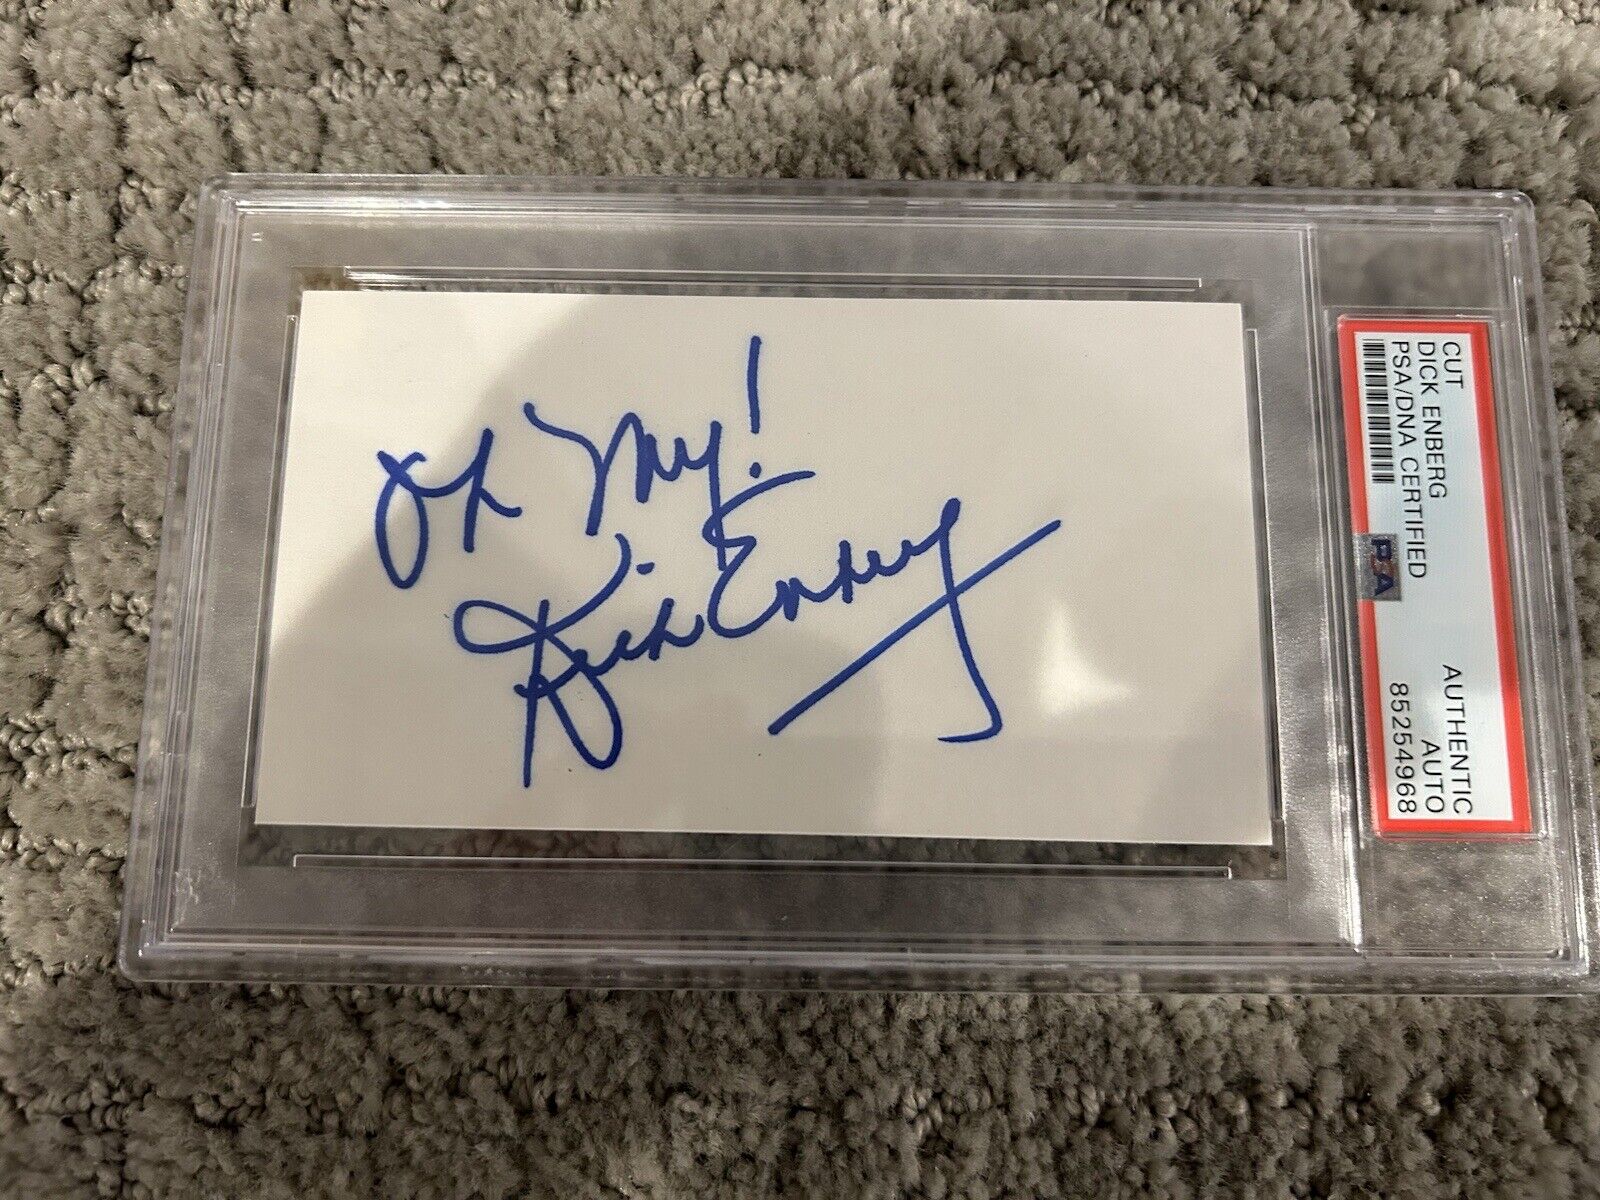 Dick Enberg Signed Cut PSA Certified Autograph Inscribed Auto